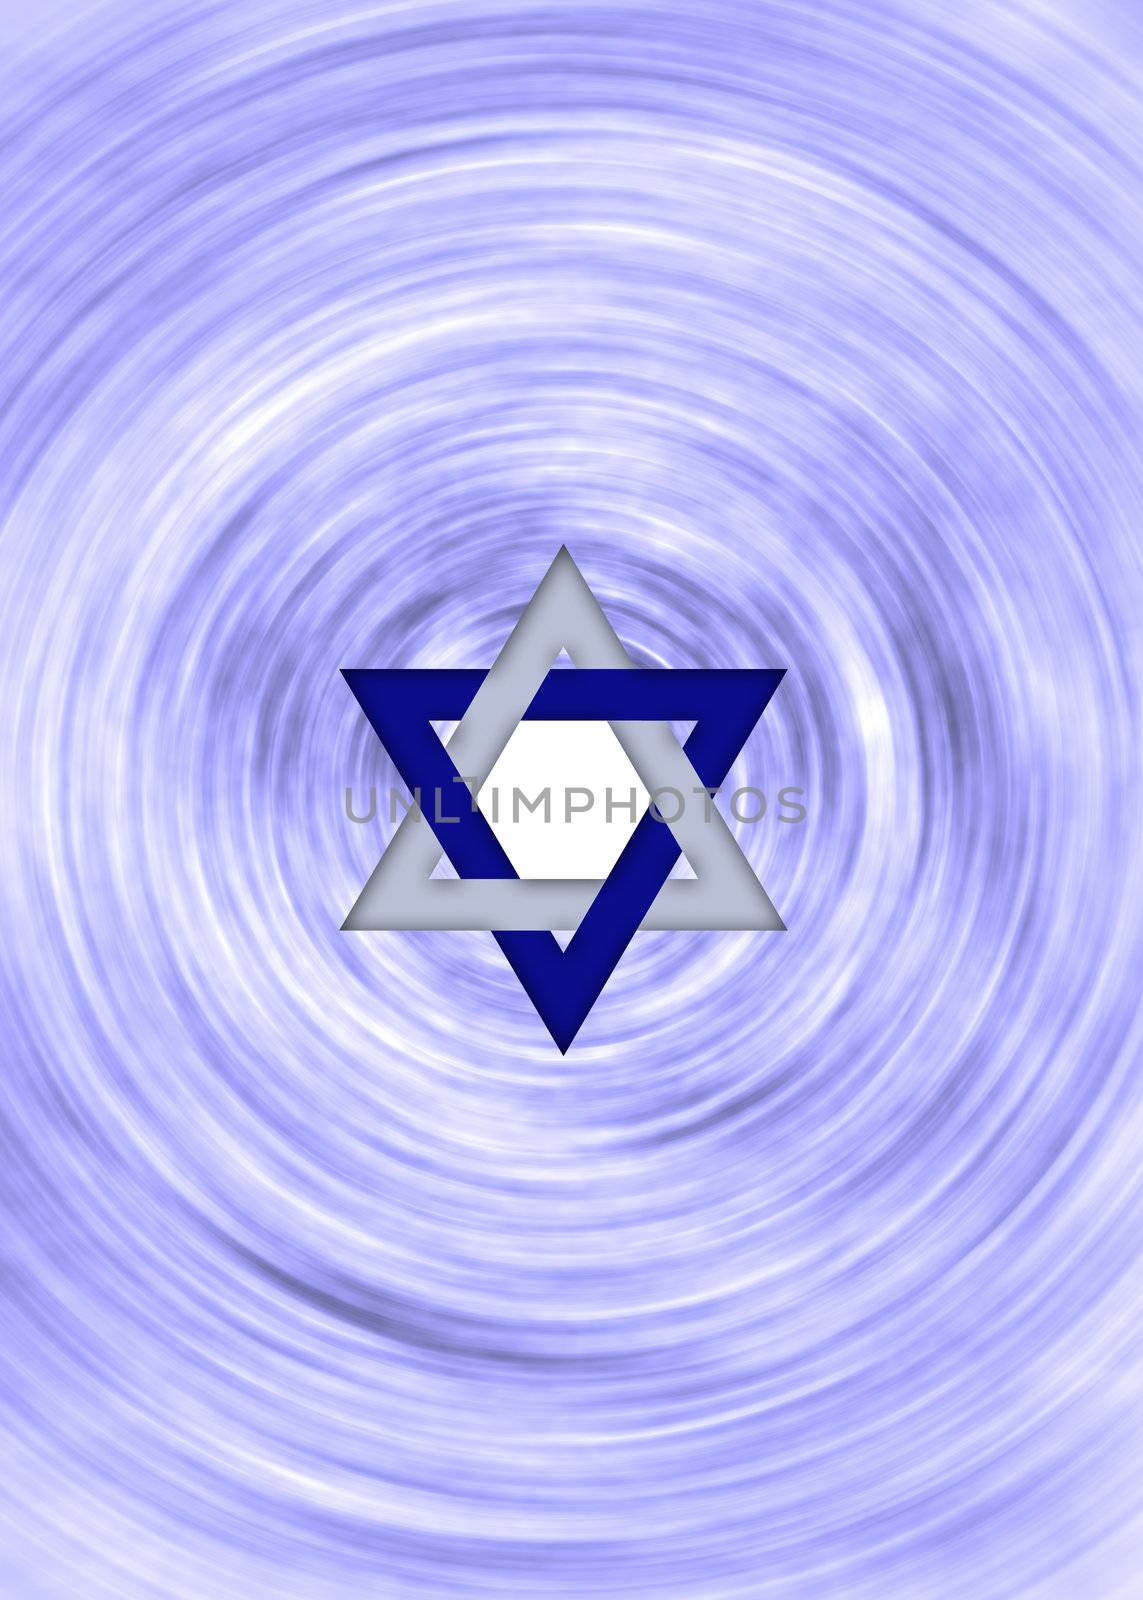 Jewish star of david background illustration with blue and silver colors
